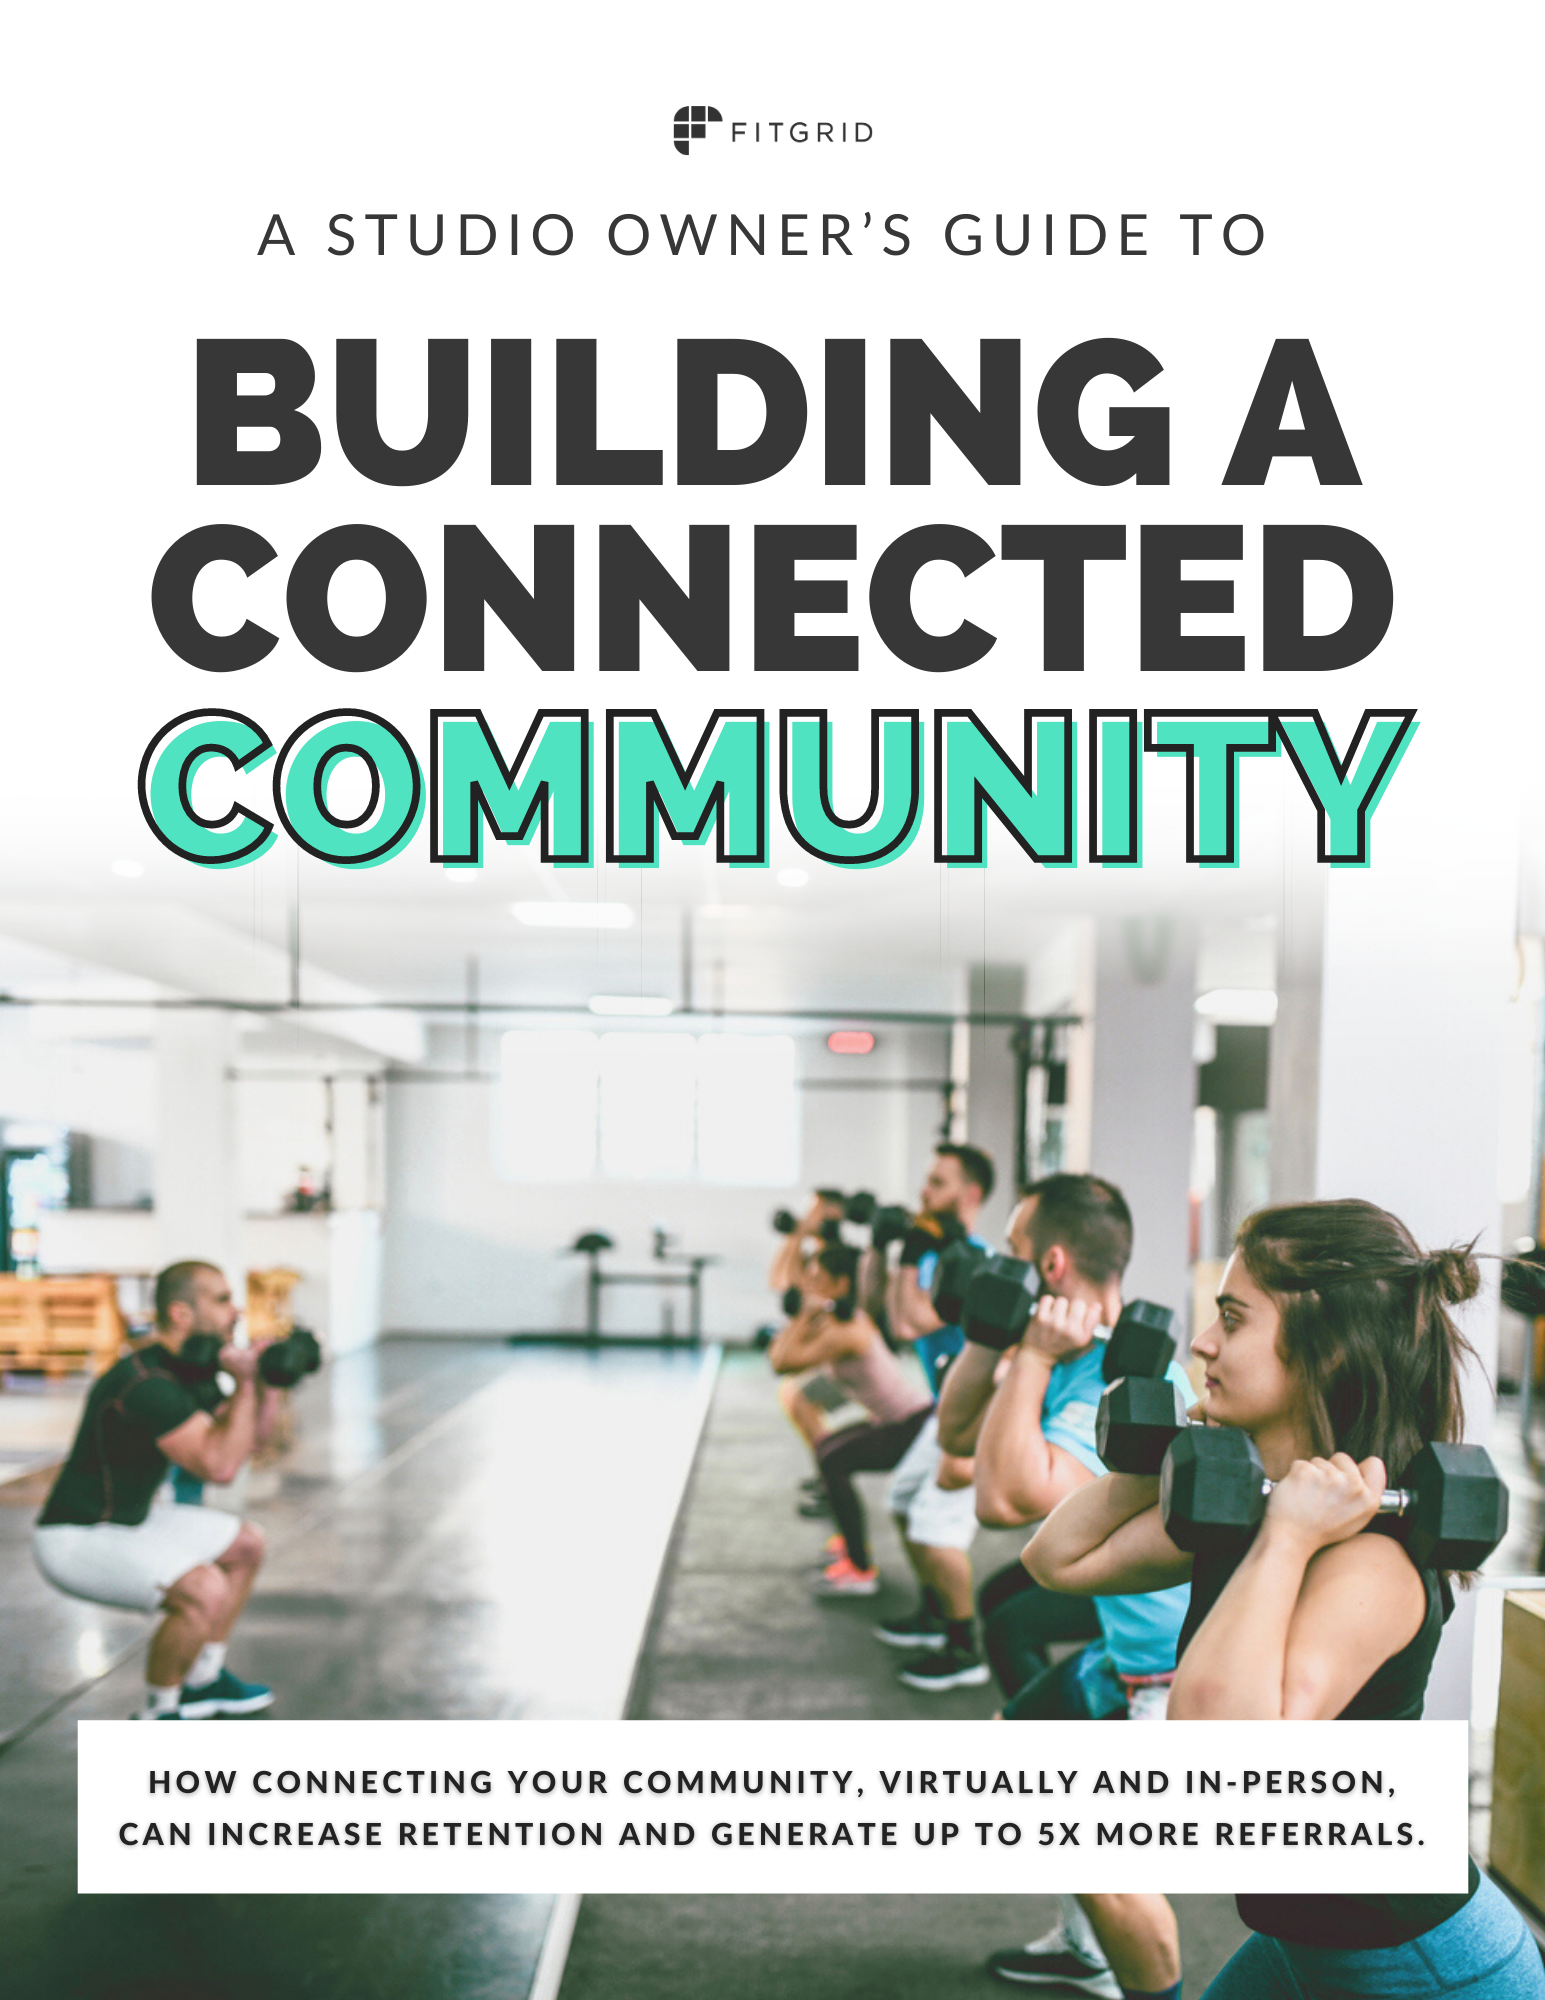 A-Studio-Owner’s-Guide-to-Building-a-Connected-Community